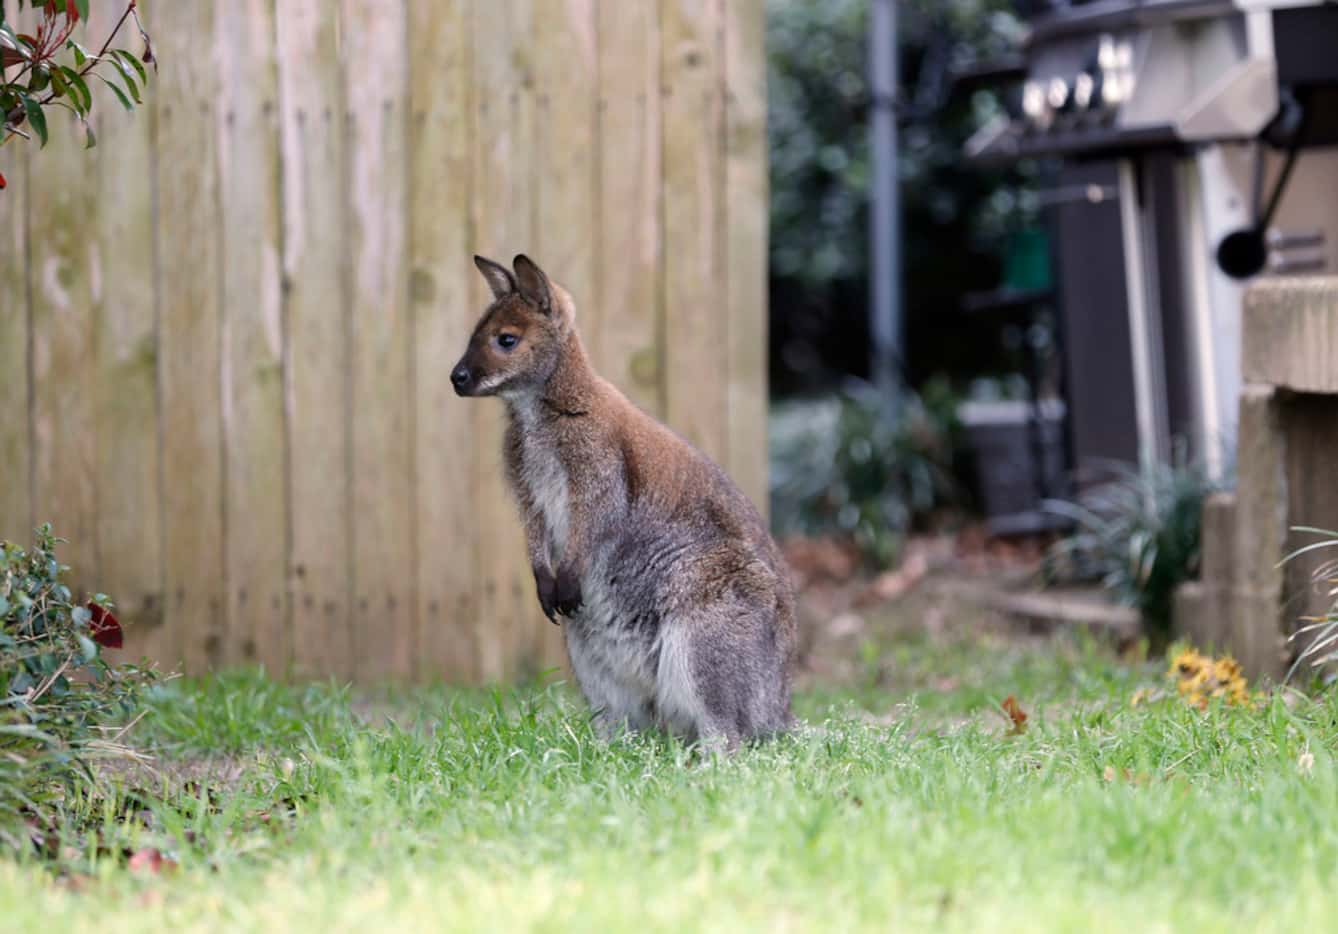 A wallaby roams in the front yard of a Dallas neighborhood on Wednesday.